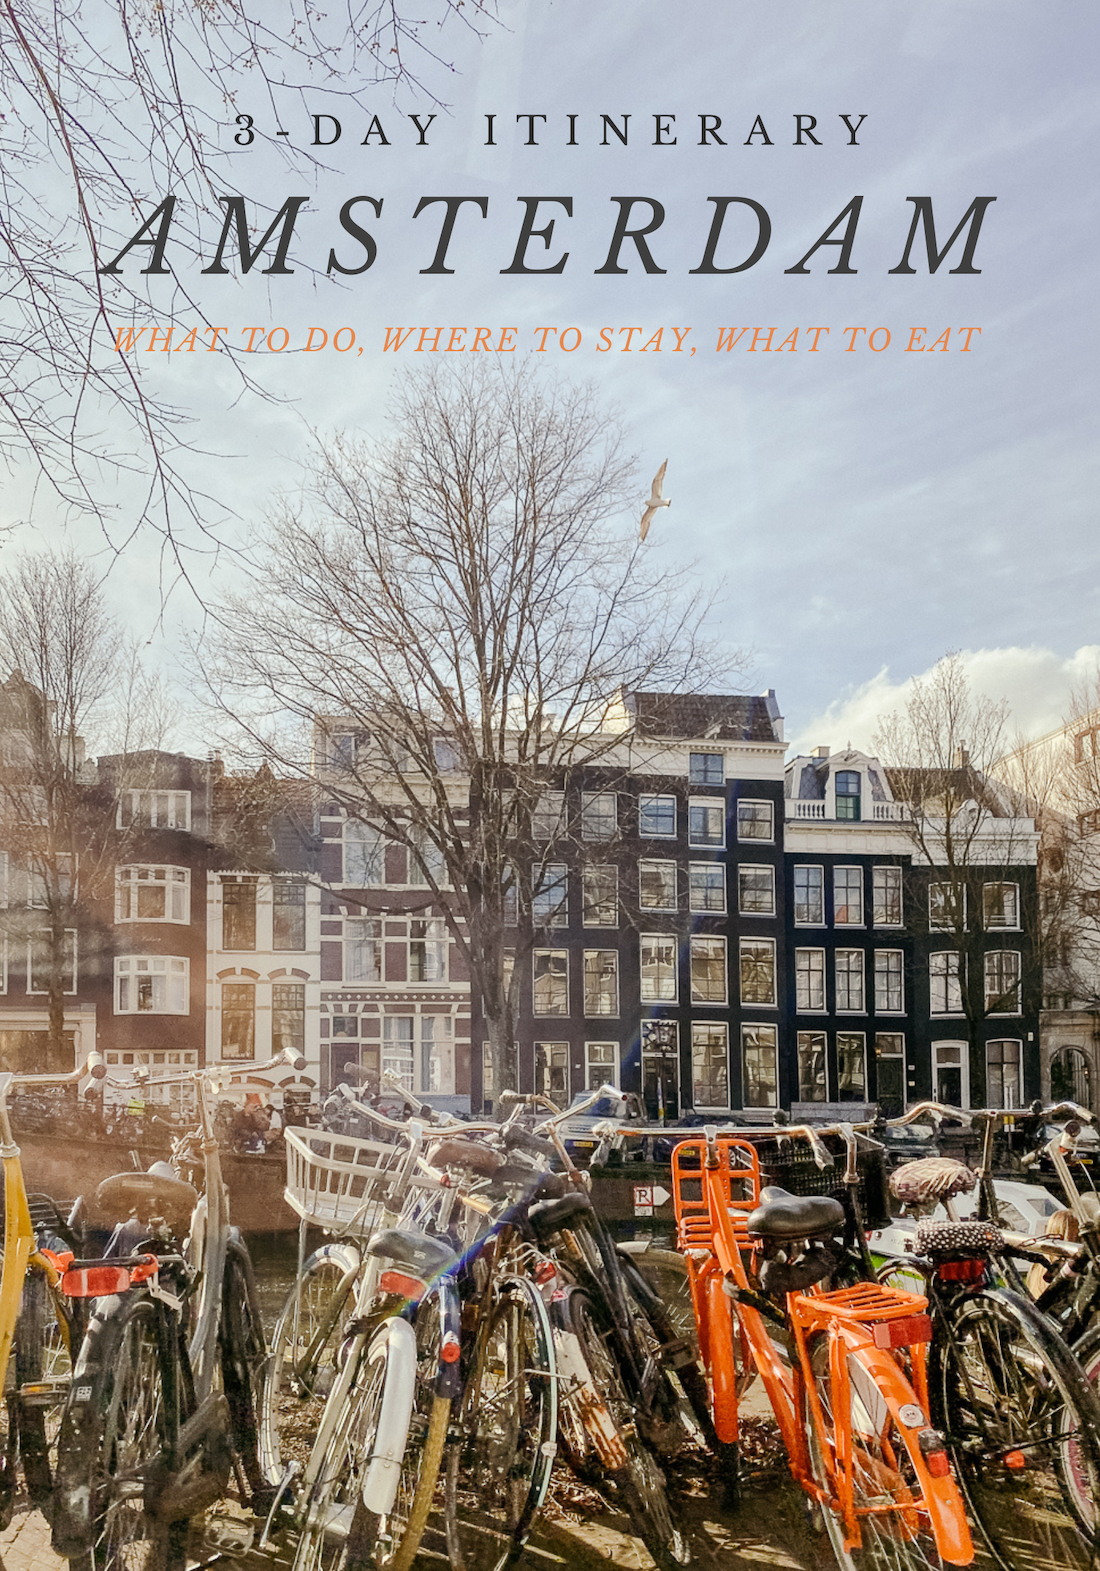 amsterdam itinerary, amsterdam canal houses with bicycles, amsterdam in spring